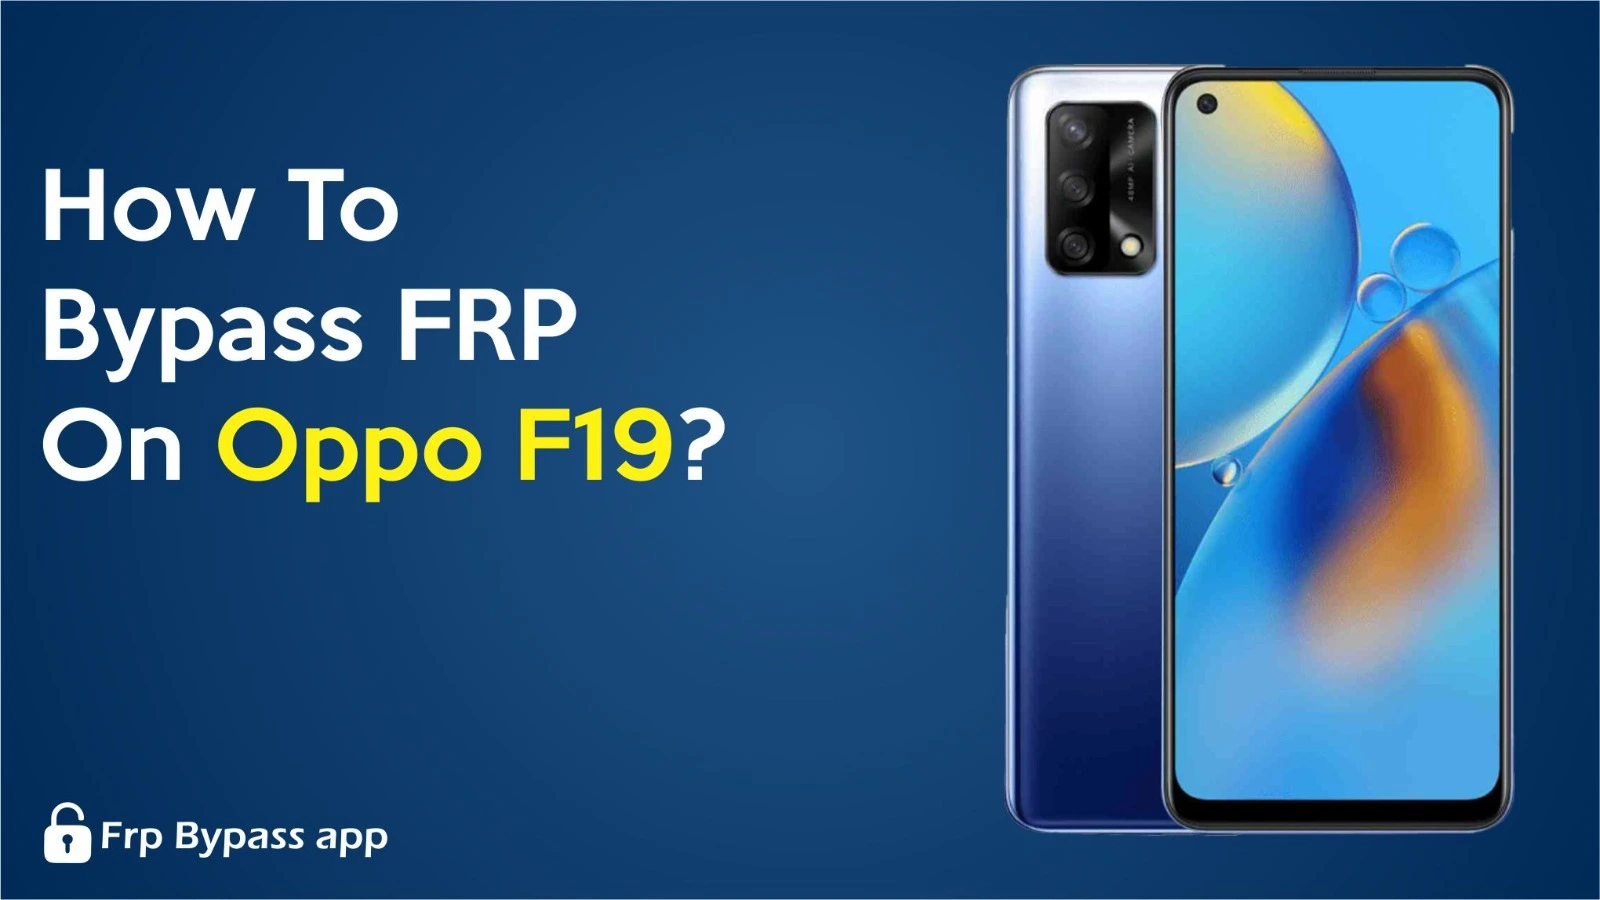 How To Bypass FRP On Oppo F19 image